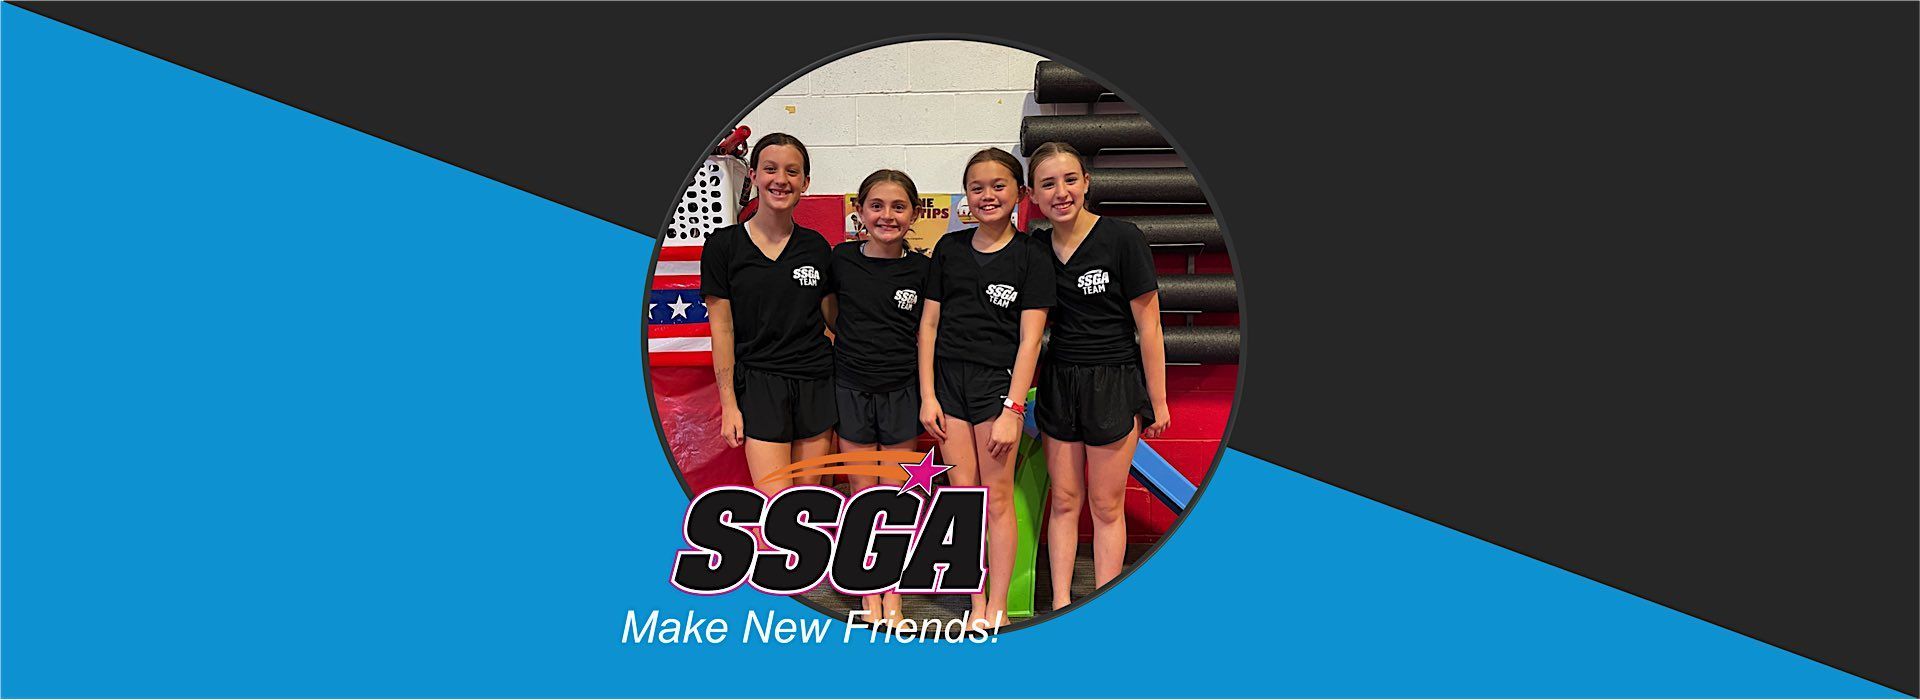 Make new friends while you learn gymnastics!